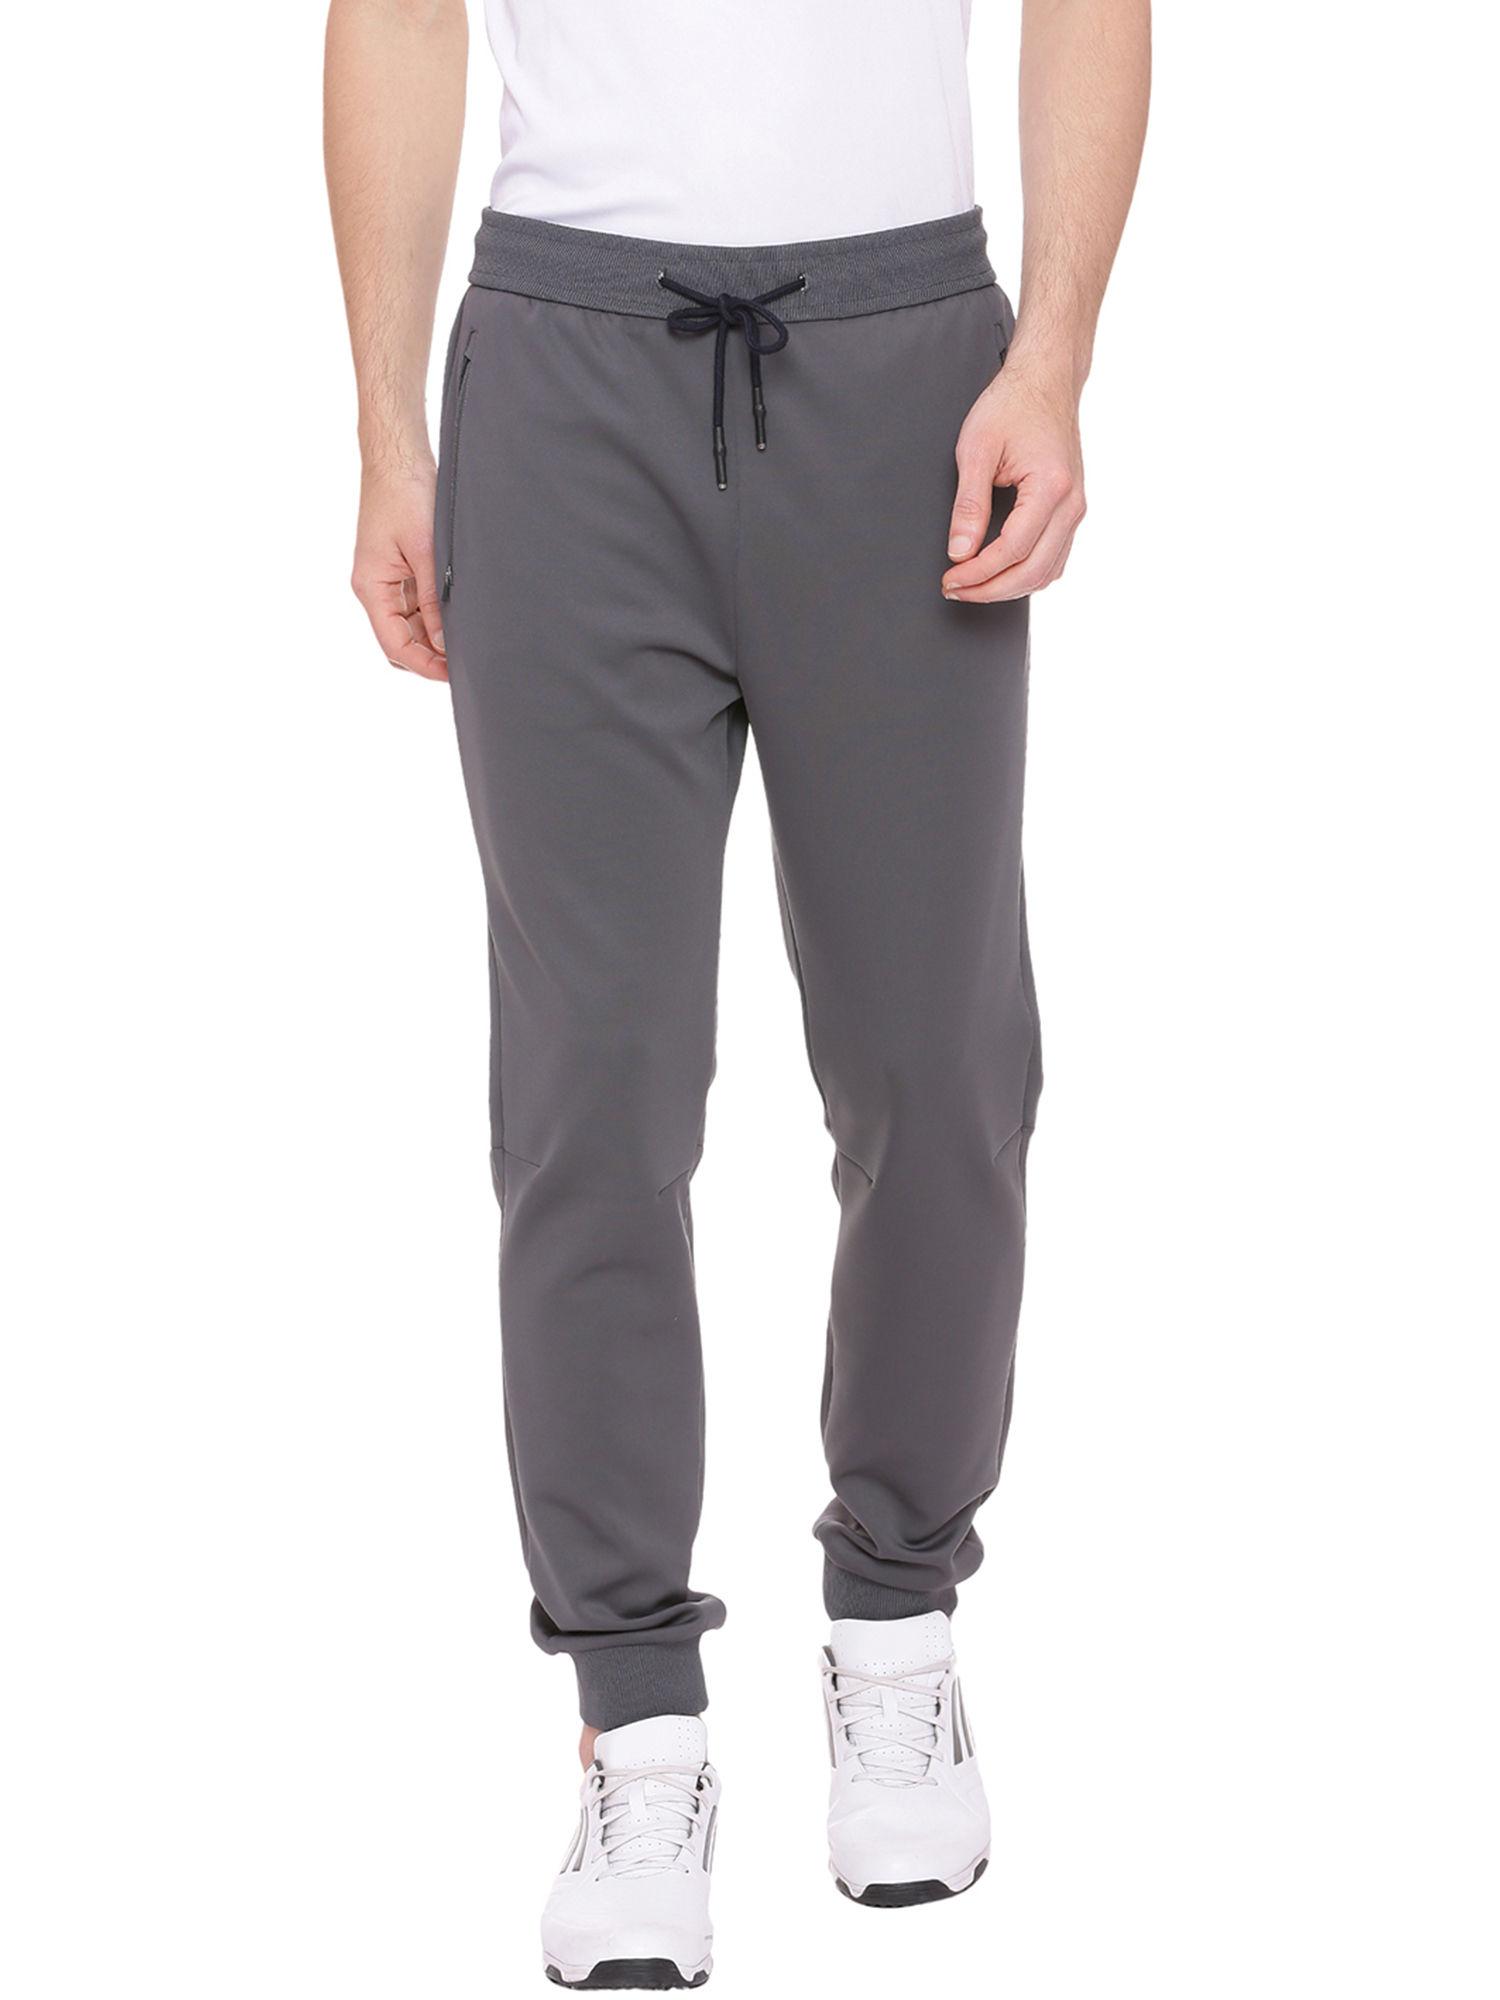 jogger fit urban grey knitted track pant